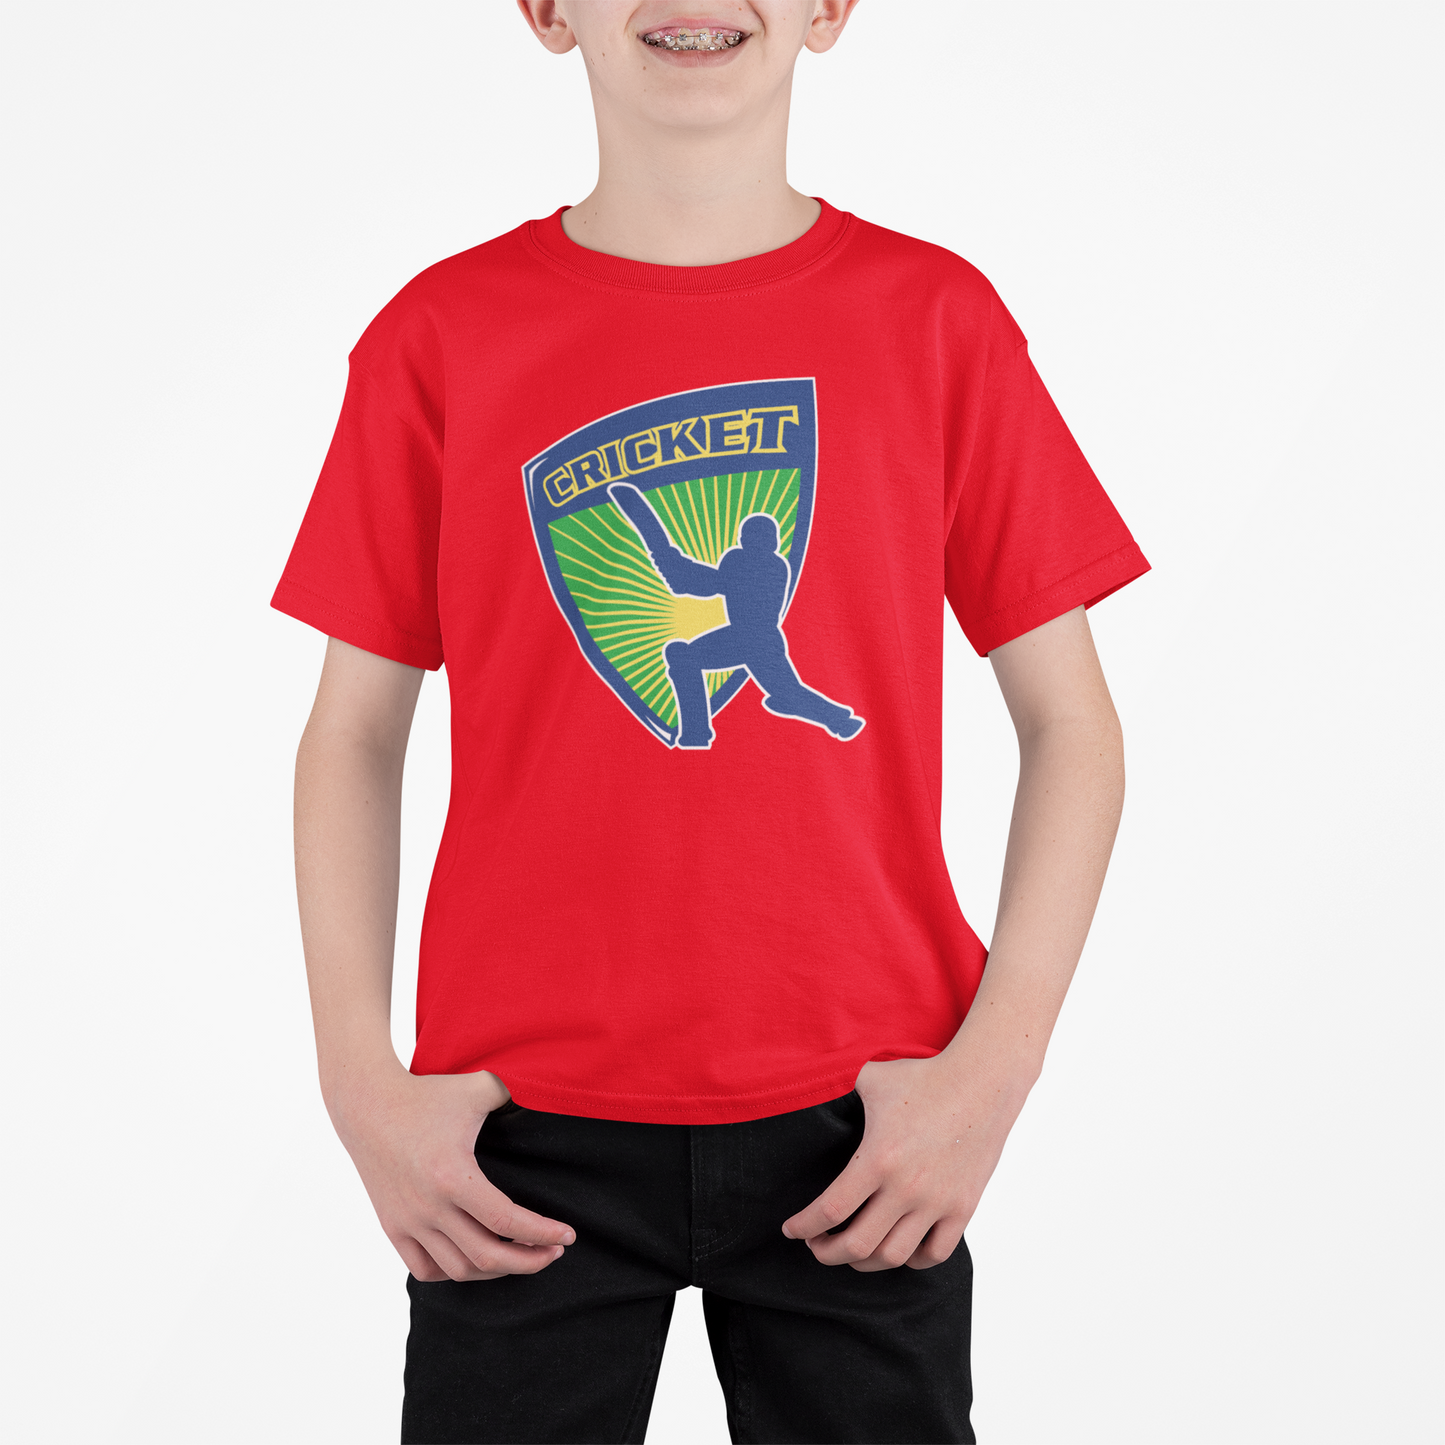 Cricketer T-shirt for Boys Red